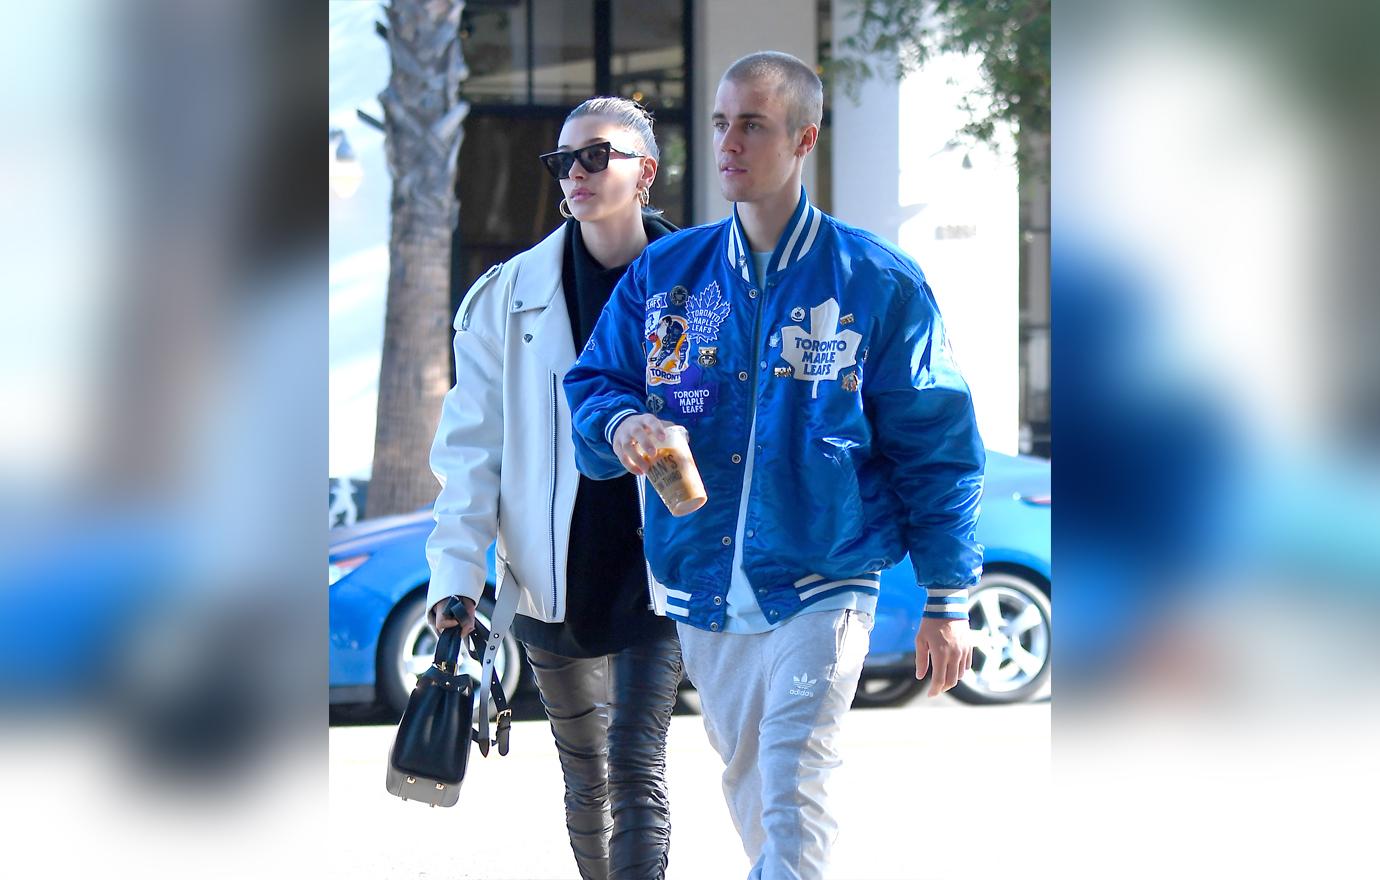 Justin Bieber makes out with new wife Hailey Baldwin during Leafs